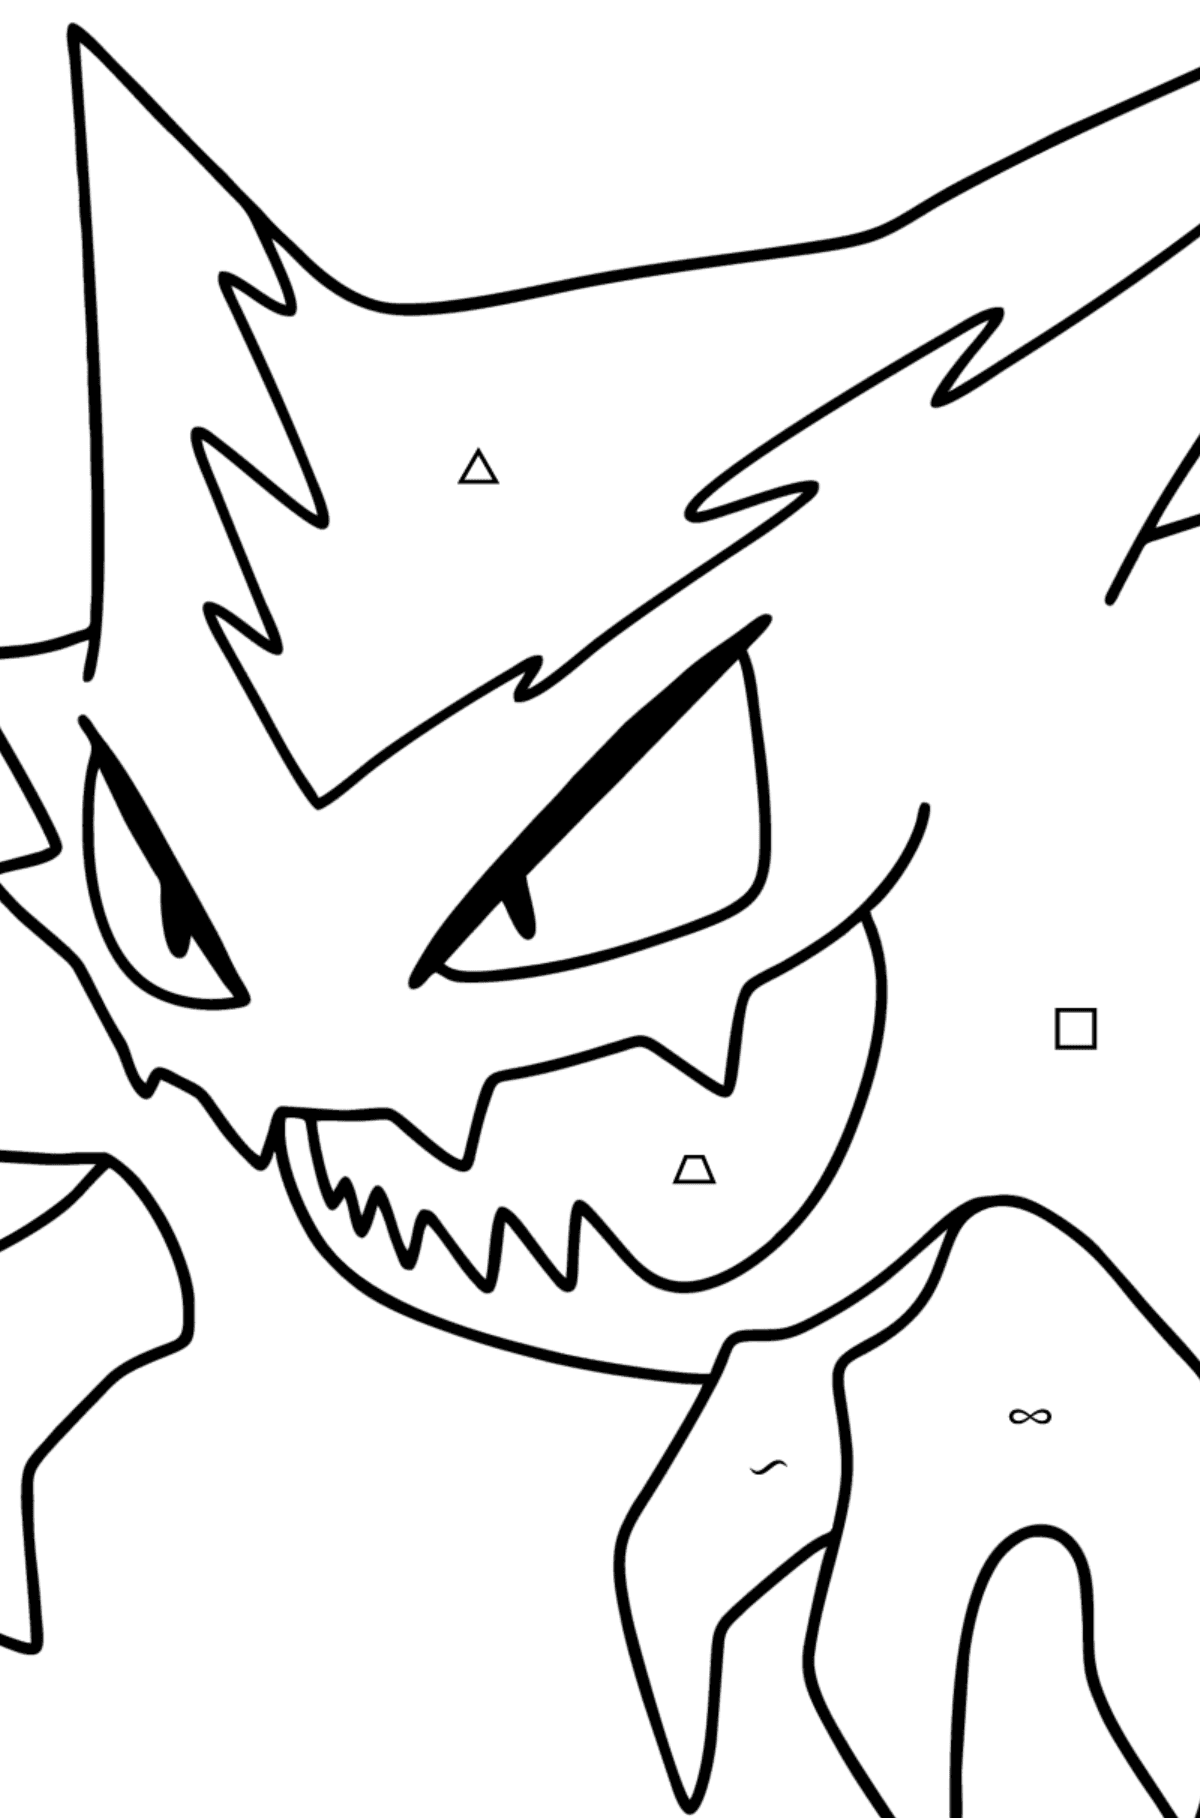 Pokémon Go Haunter coloring page - Coloring by Symbols and Geometric Shapes for Kids